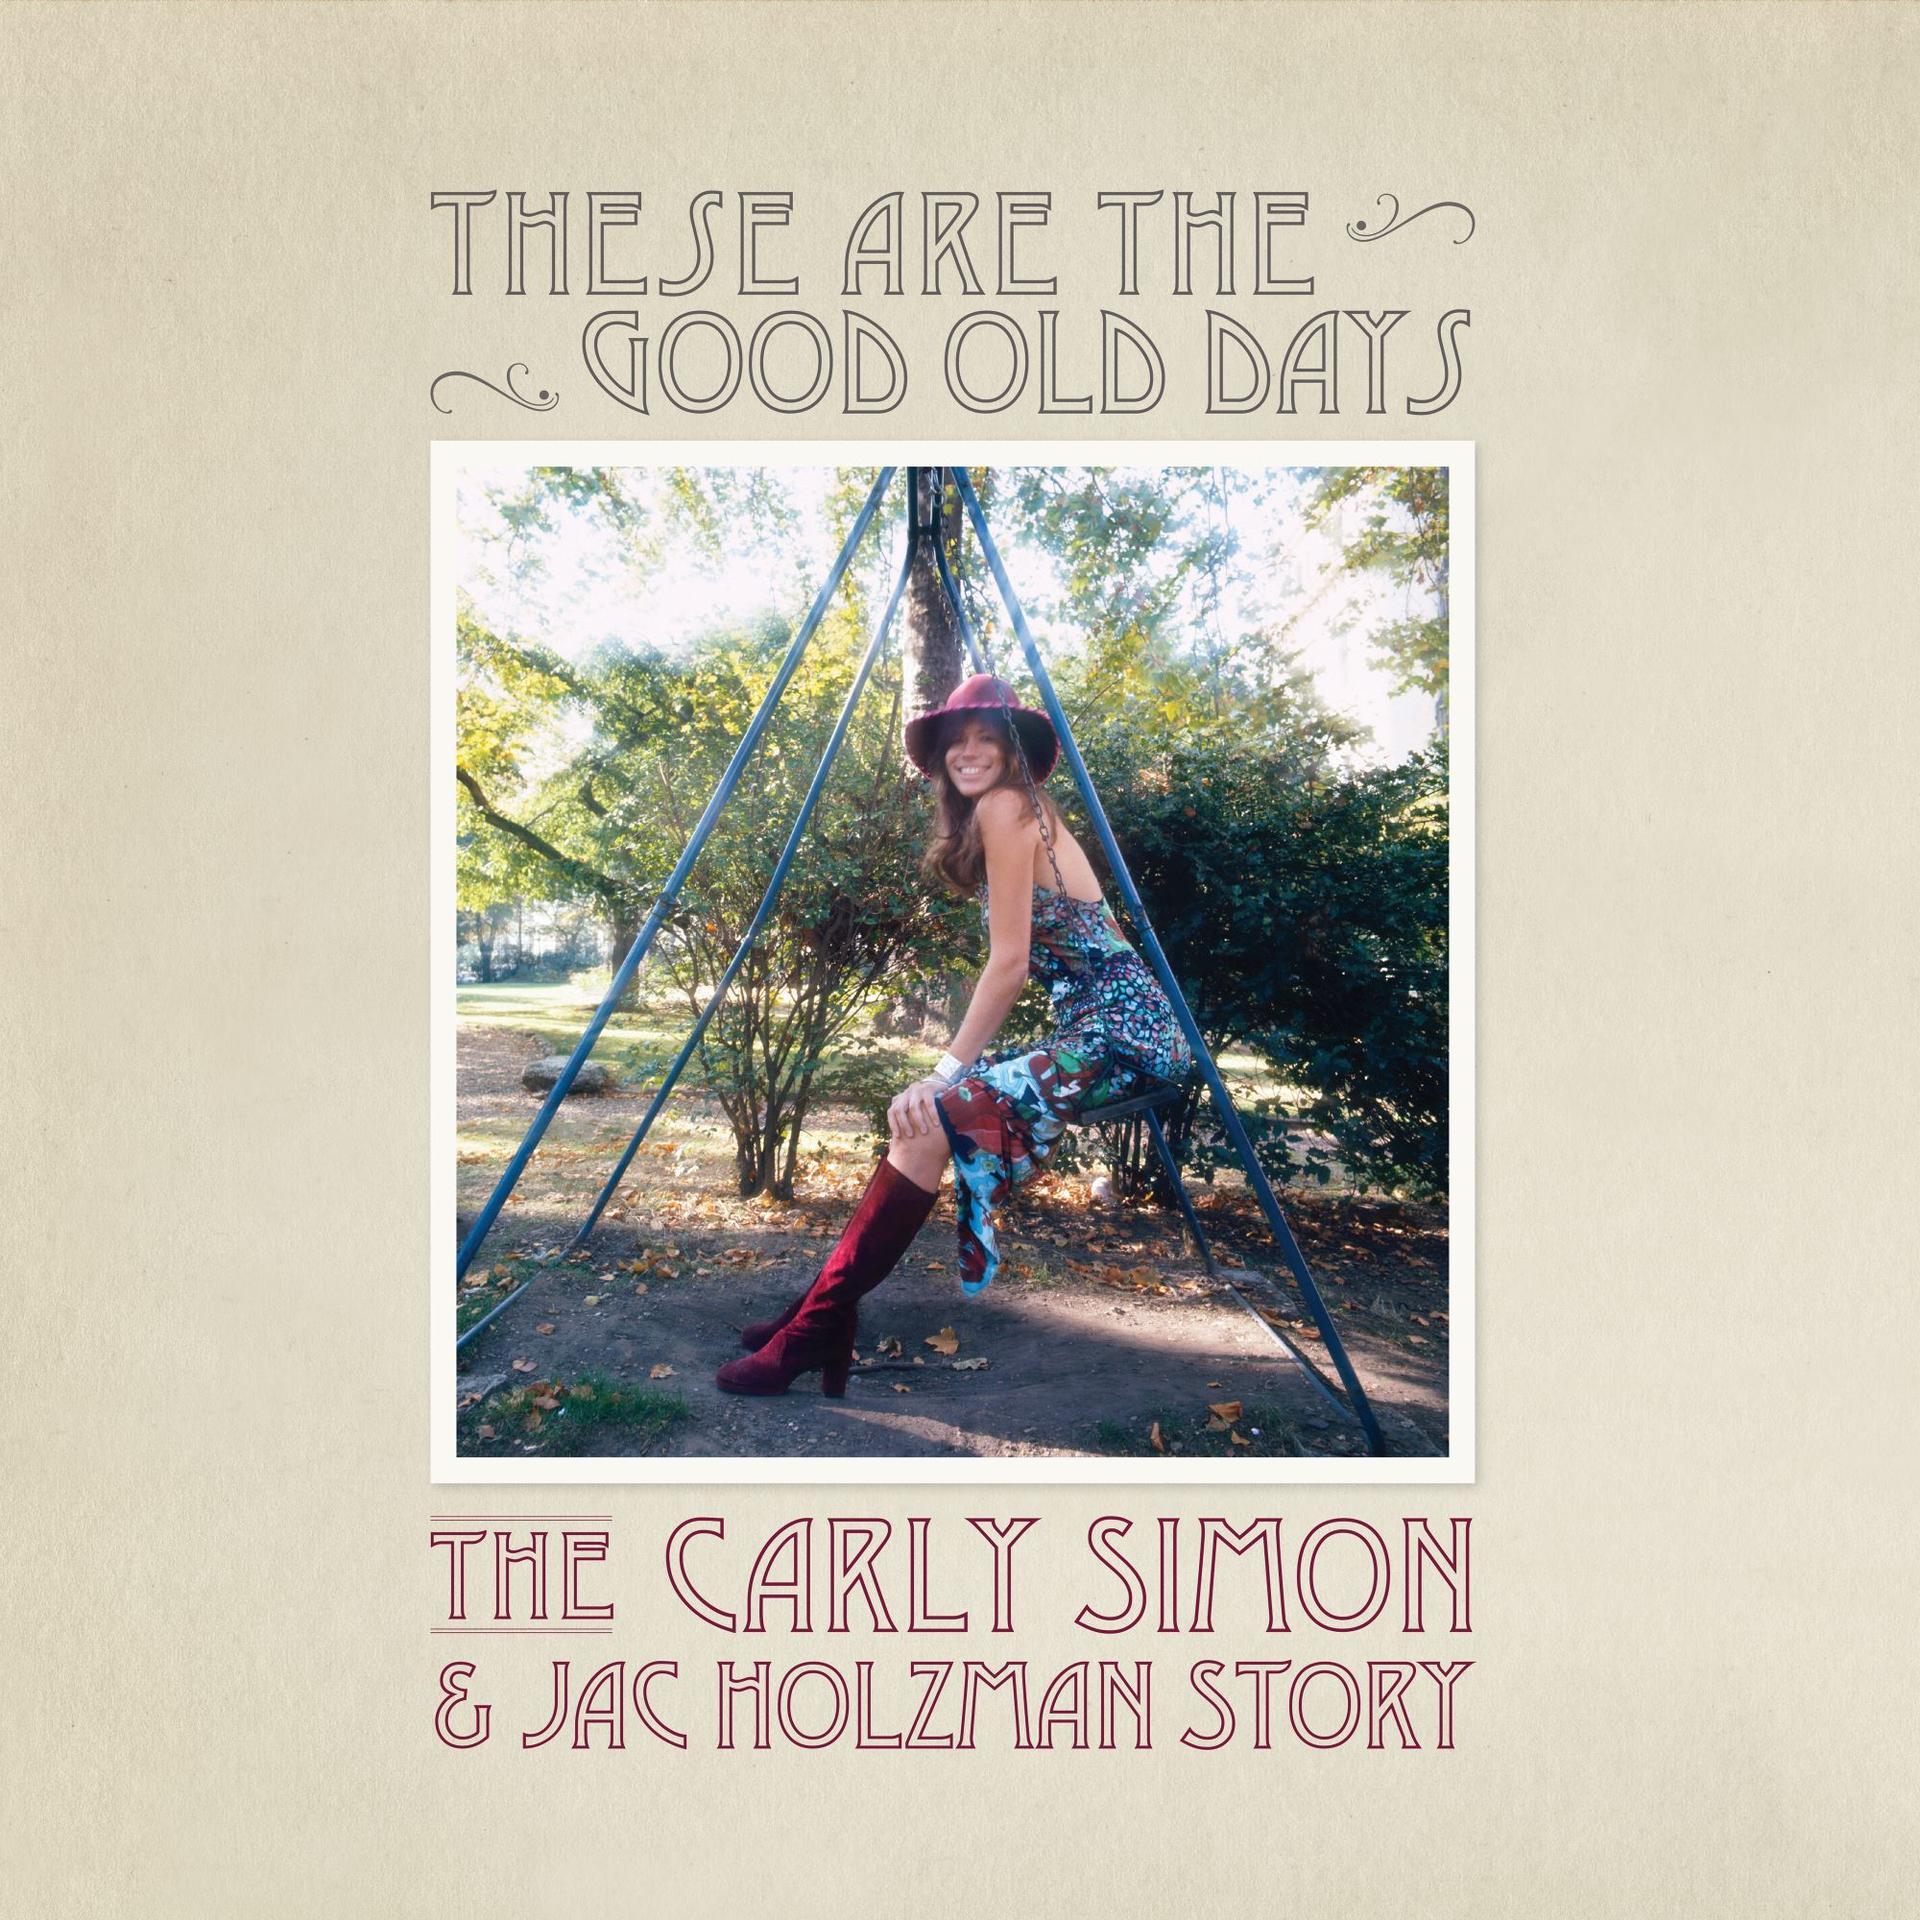 Carly Simon - (CD) Are These The Days: - Good Old